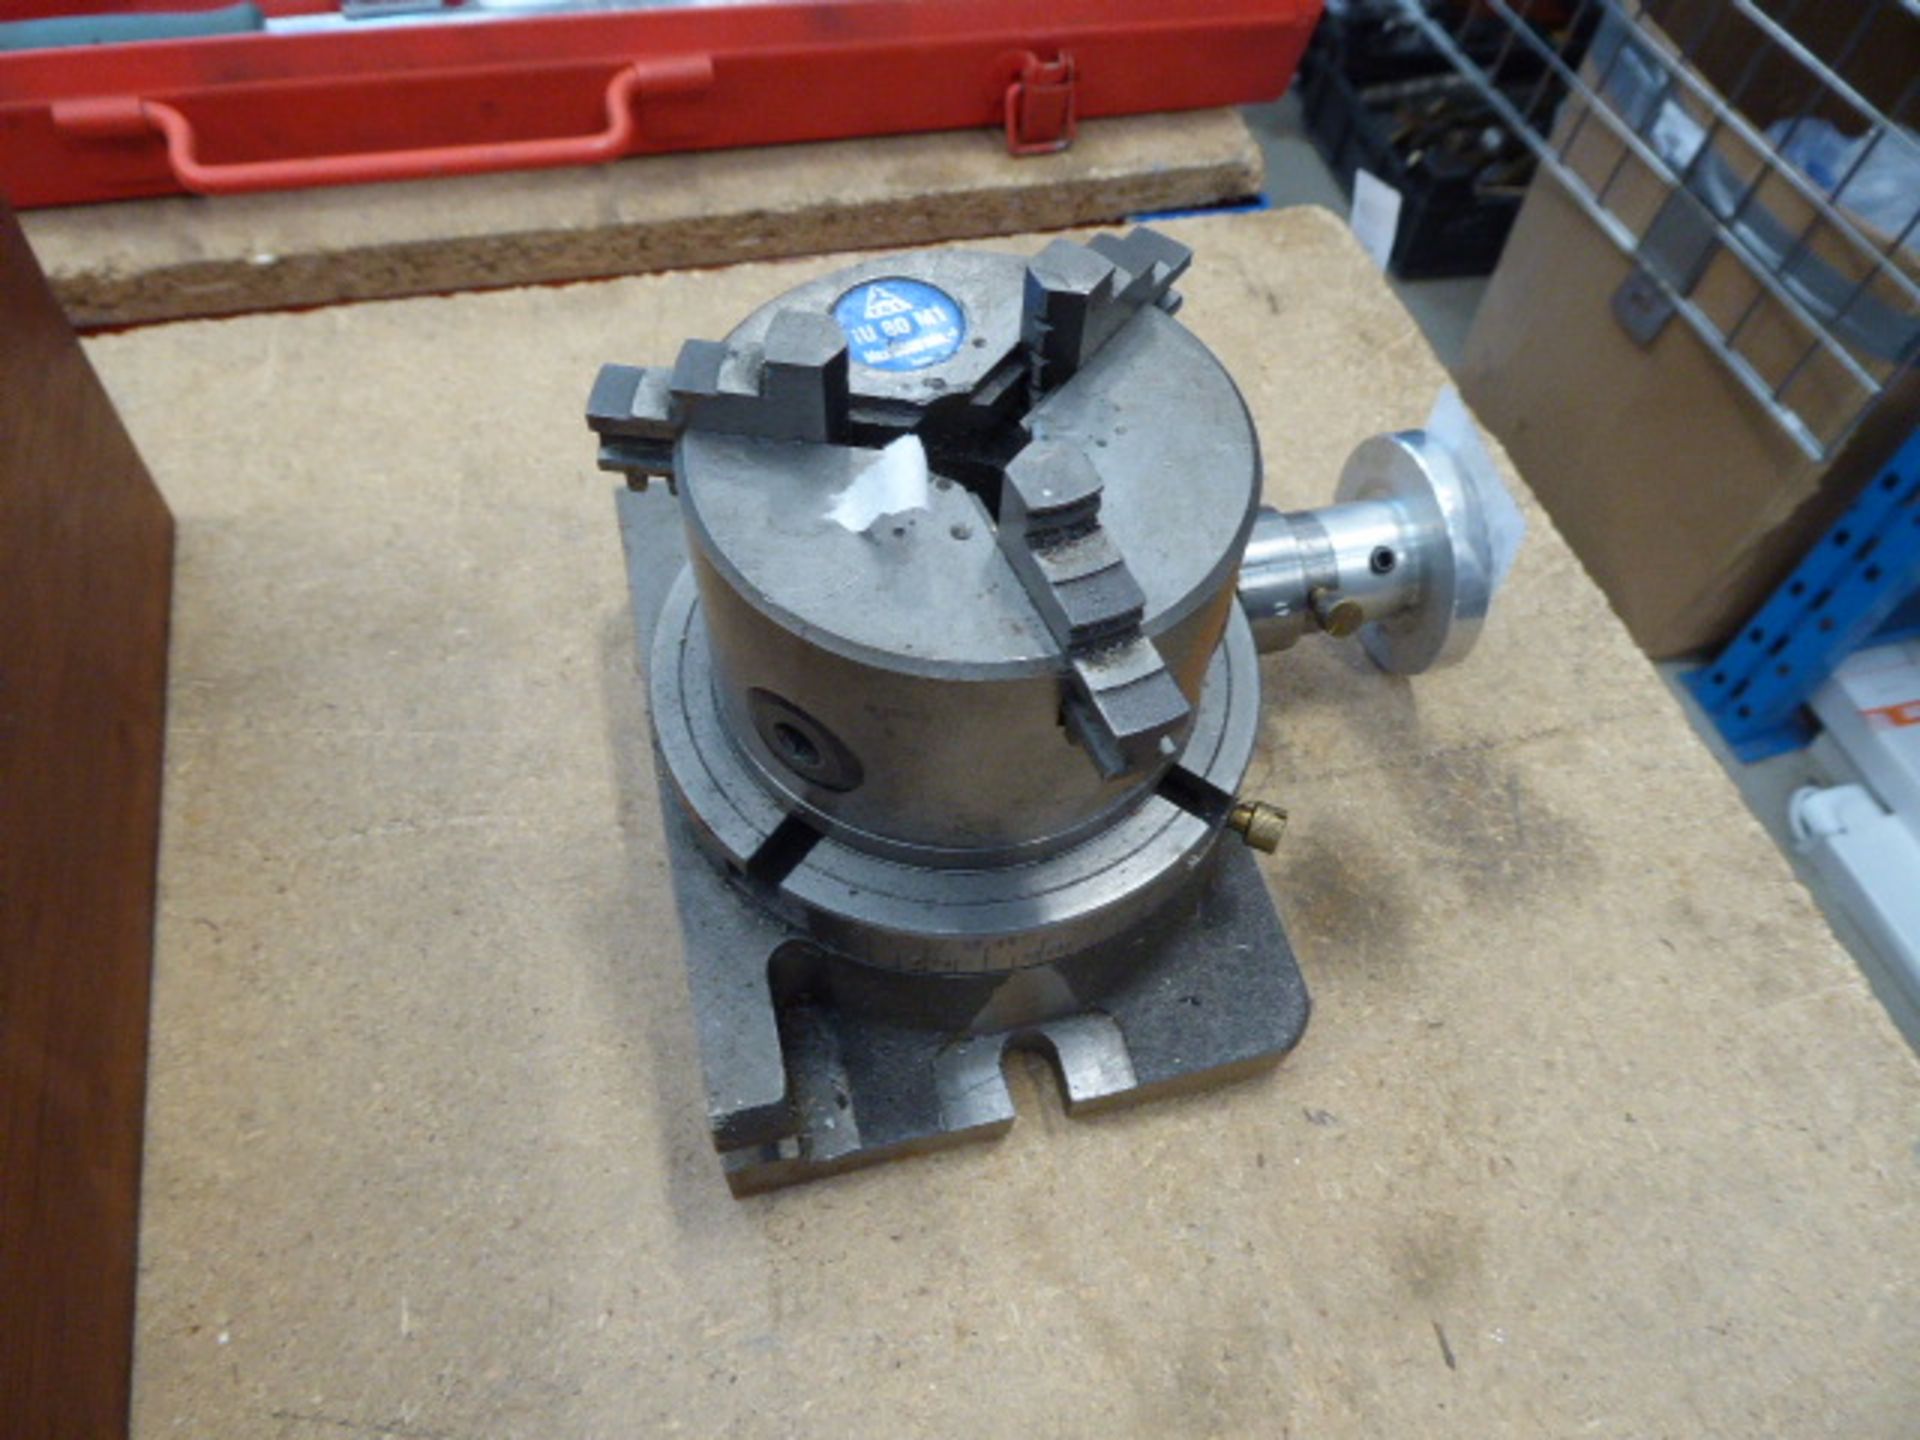 TOS rotary table with 4-jaw chuck